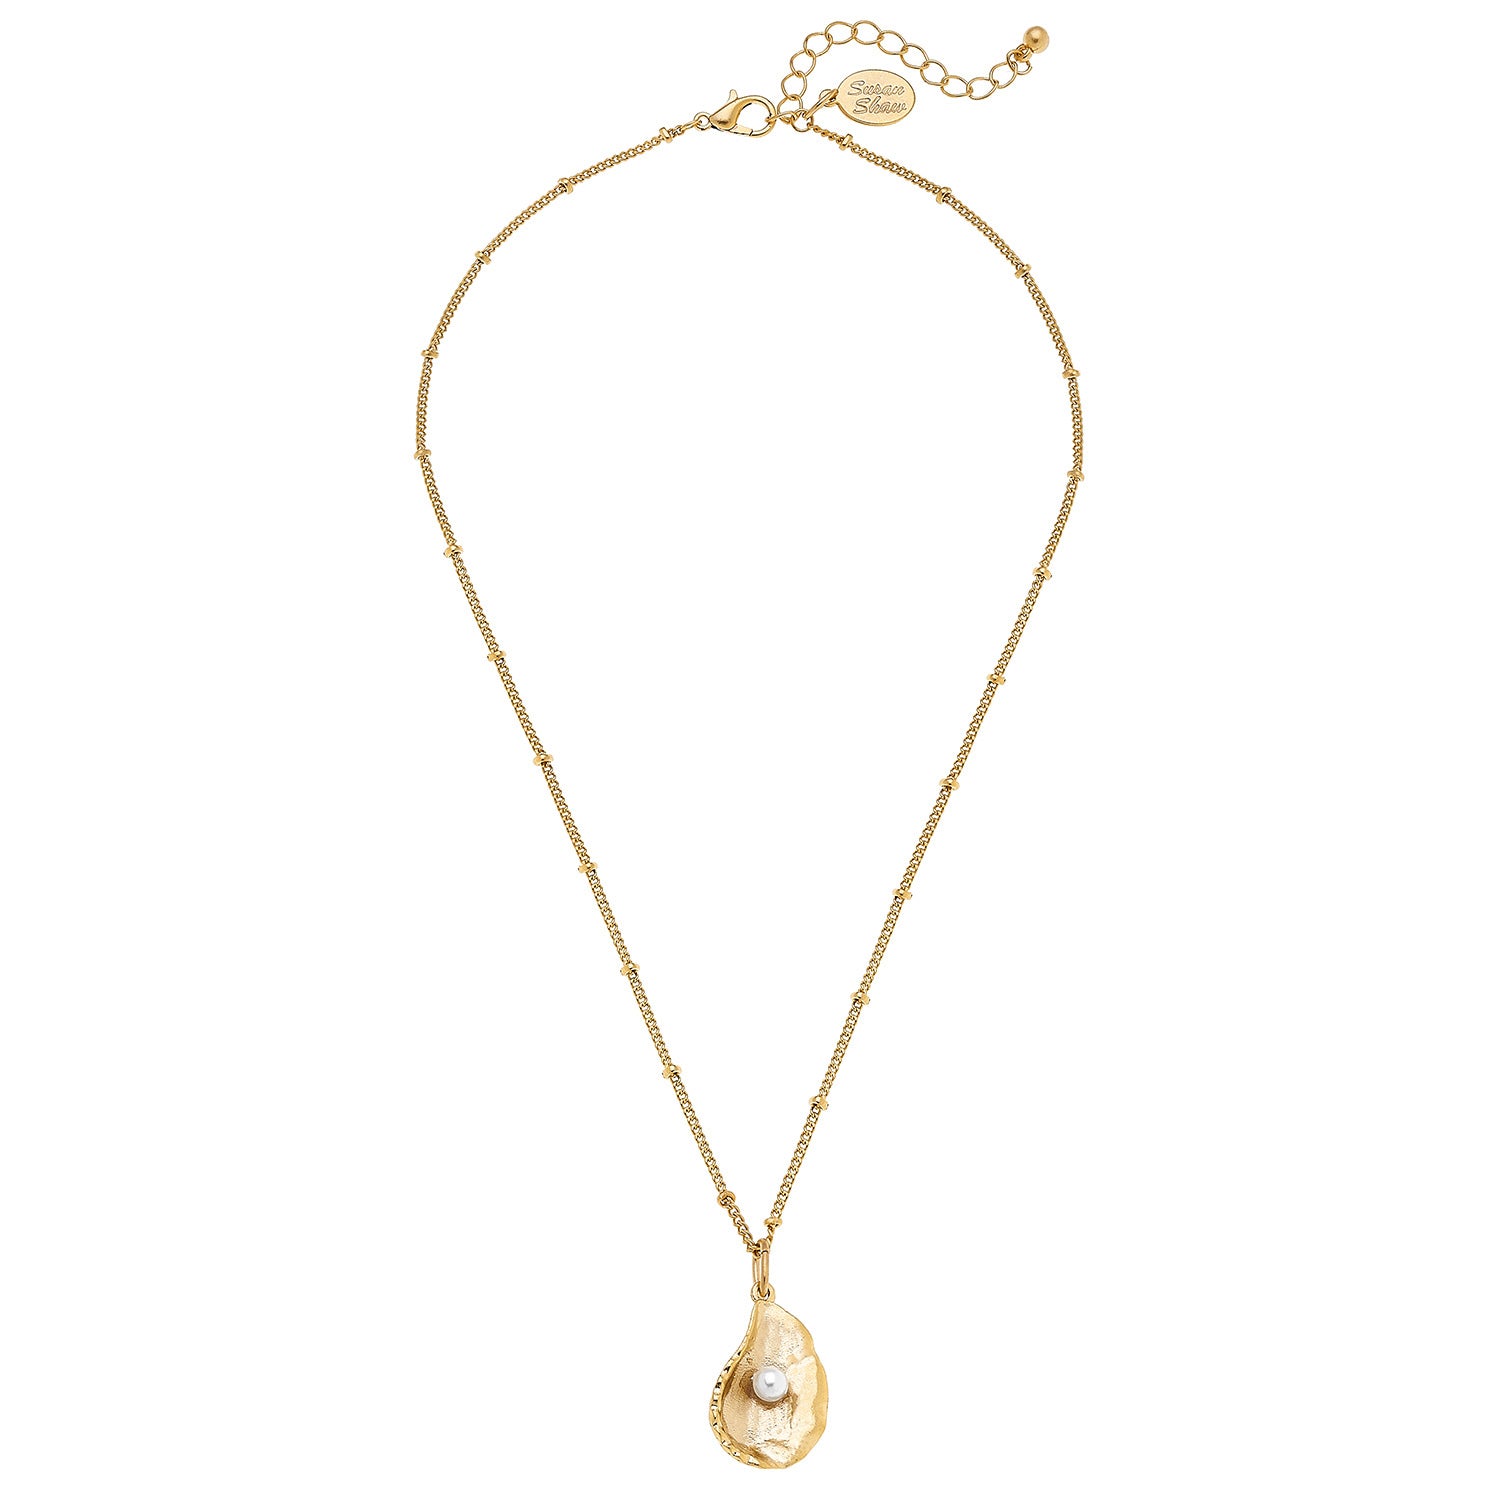 Susan Shaw Gold Plated Oyster and Pearl Pendant Necklace